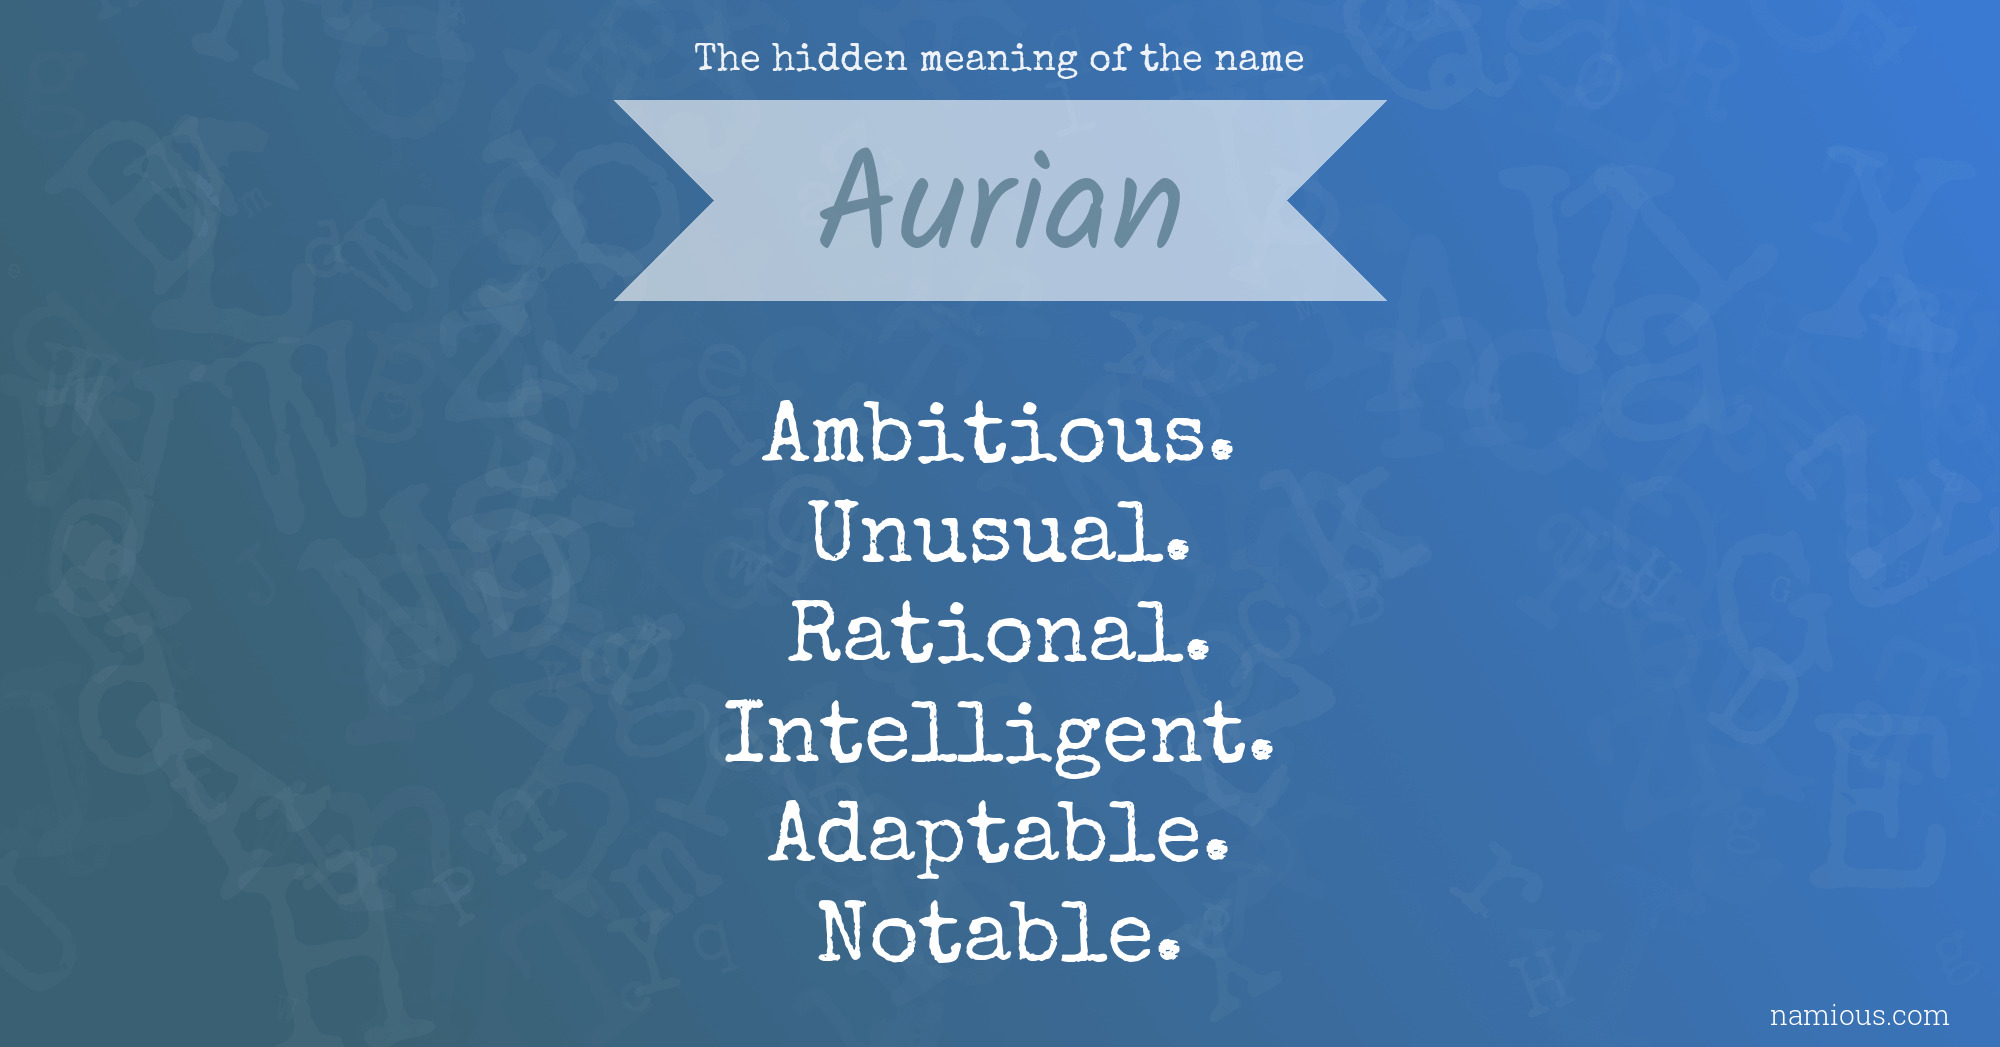 The hidden meaning of the name Aurian